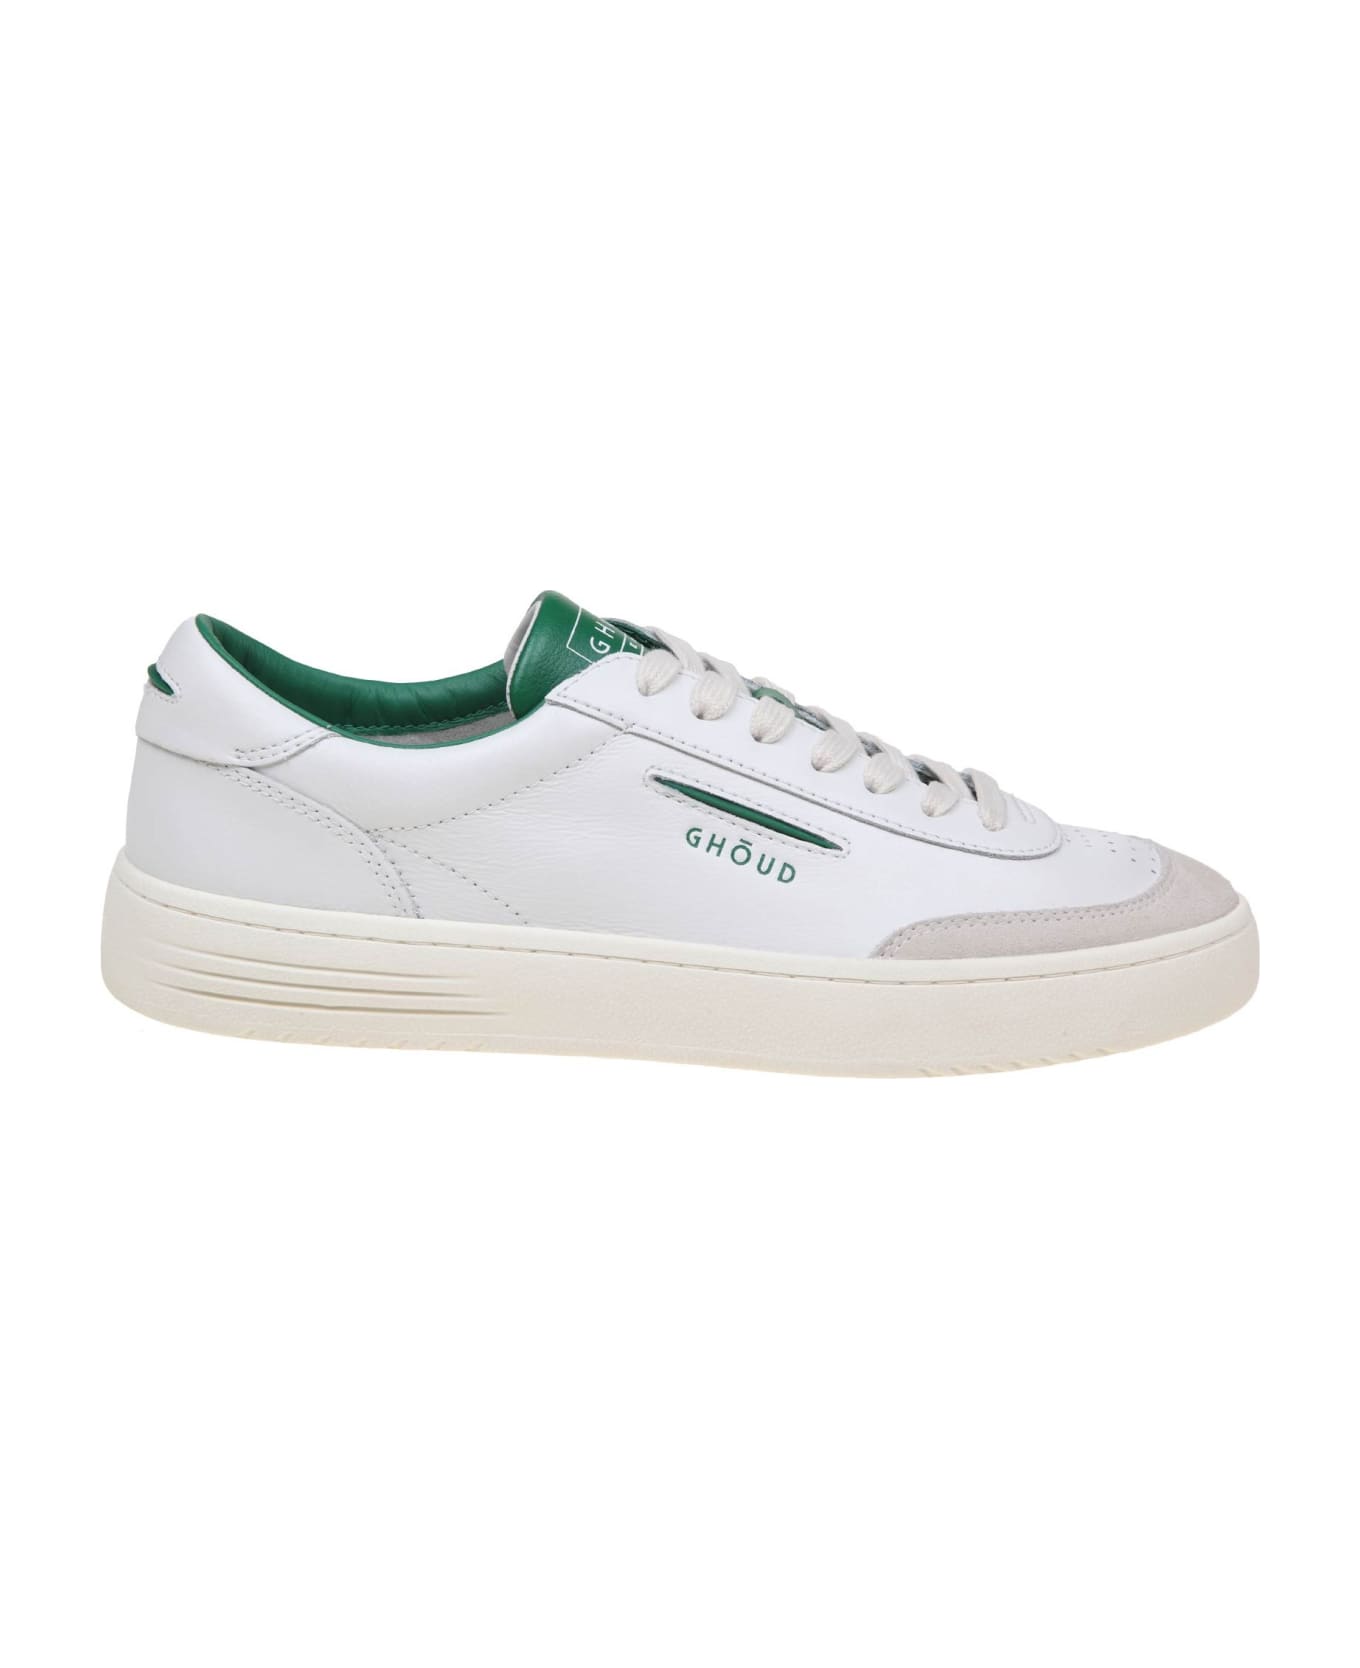 GHOUD Lido Low Sneakers In White/green Leather And Suede - Green